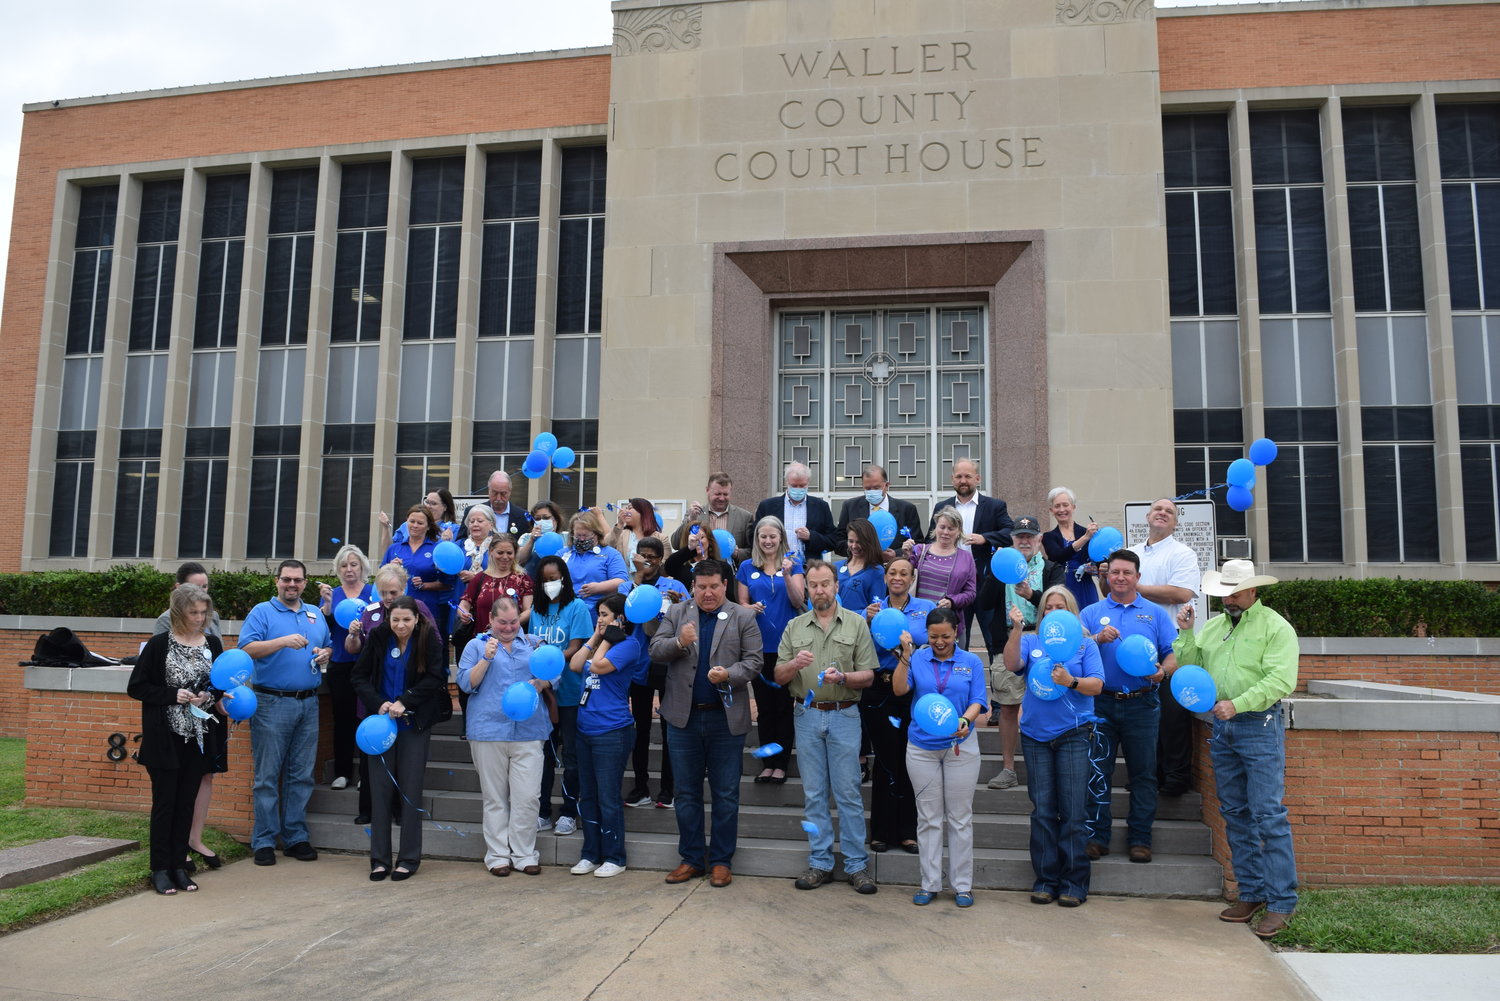 Waller County officials join members of various public and nonprofit agencies that serve the victims of sexual violence and child abuse throughout the county for a balloon-popping ceremony on the front steps of the Waller County Courthouse.